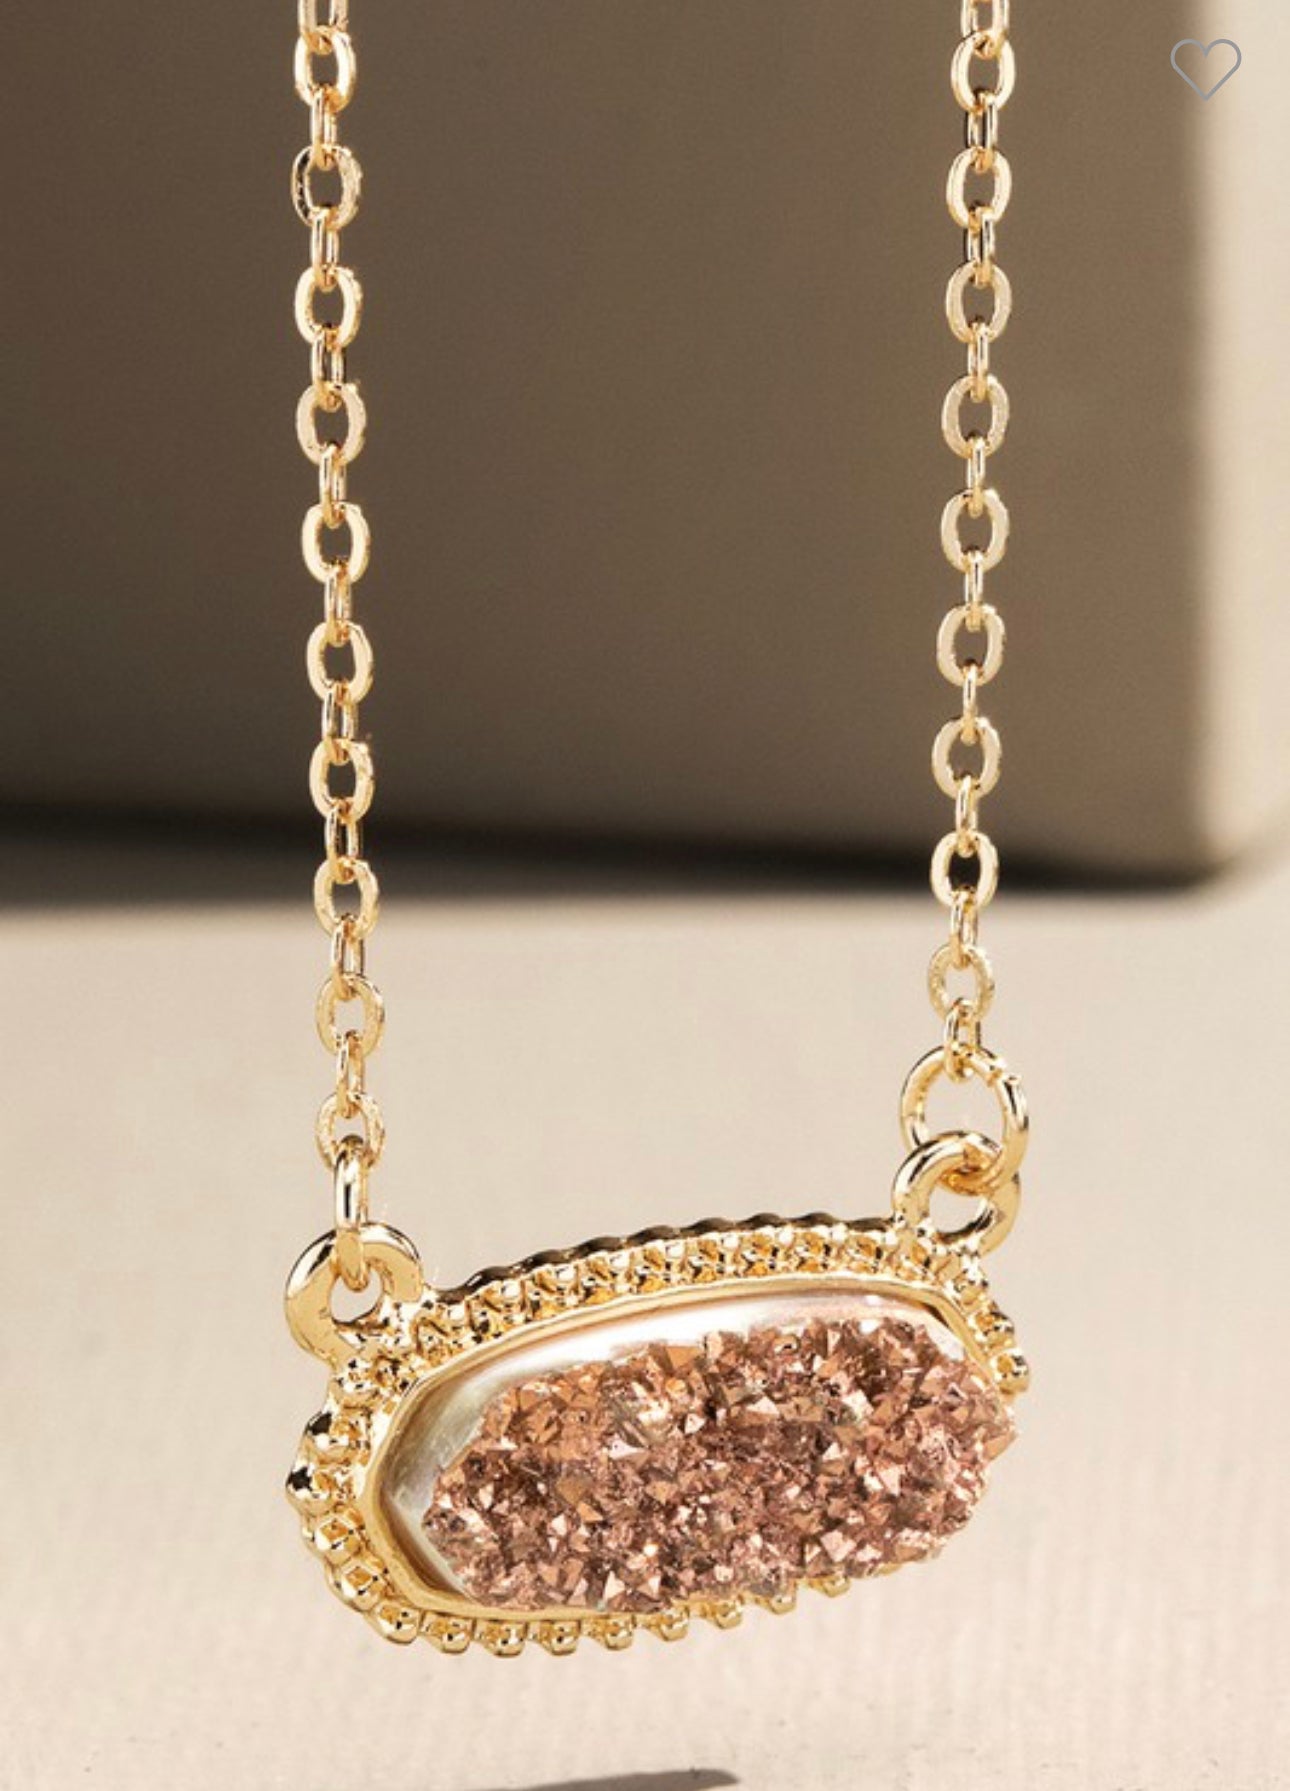 Rose gold inspired necklace